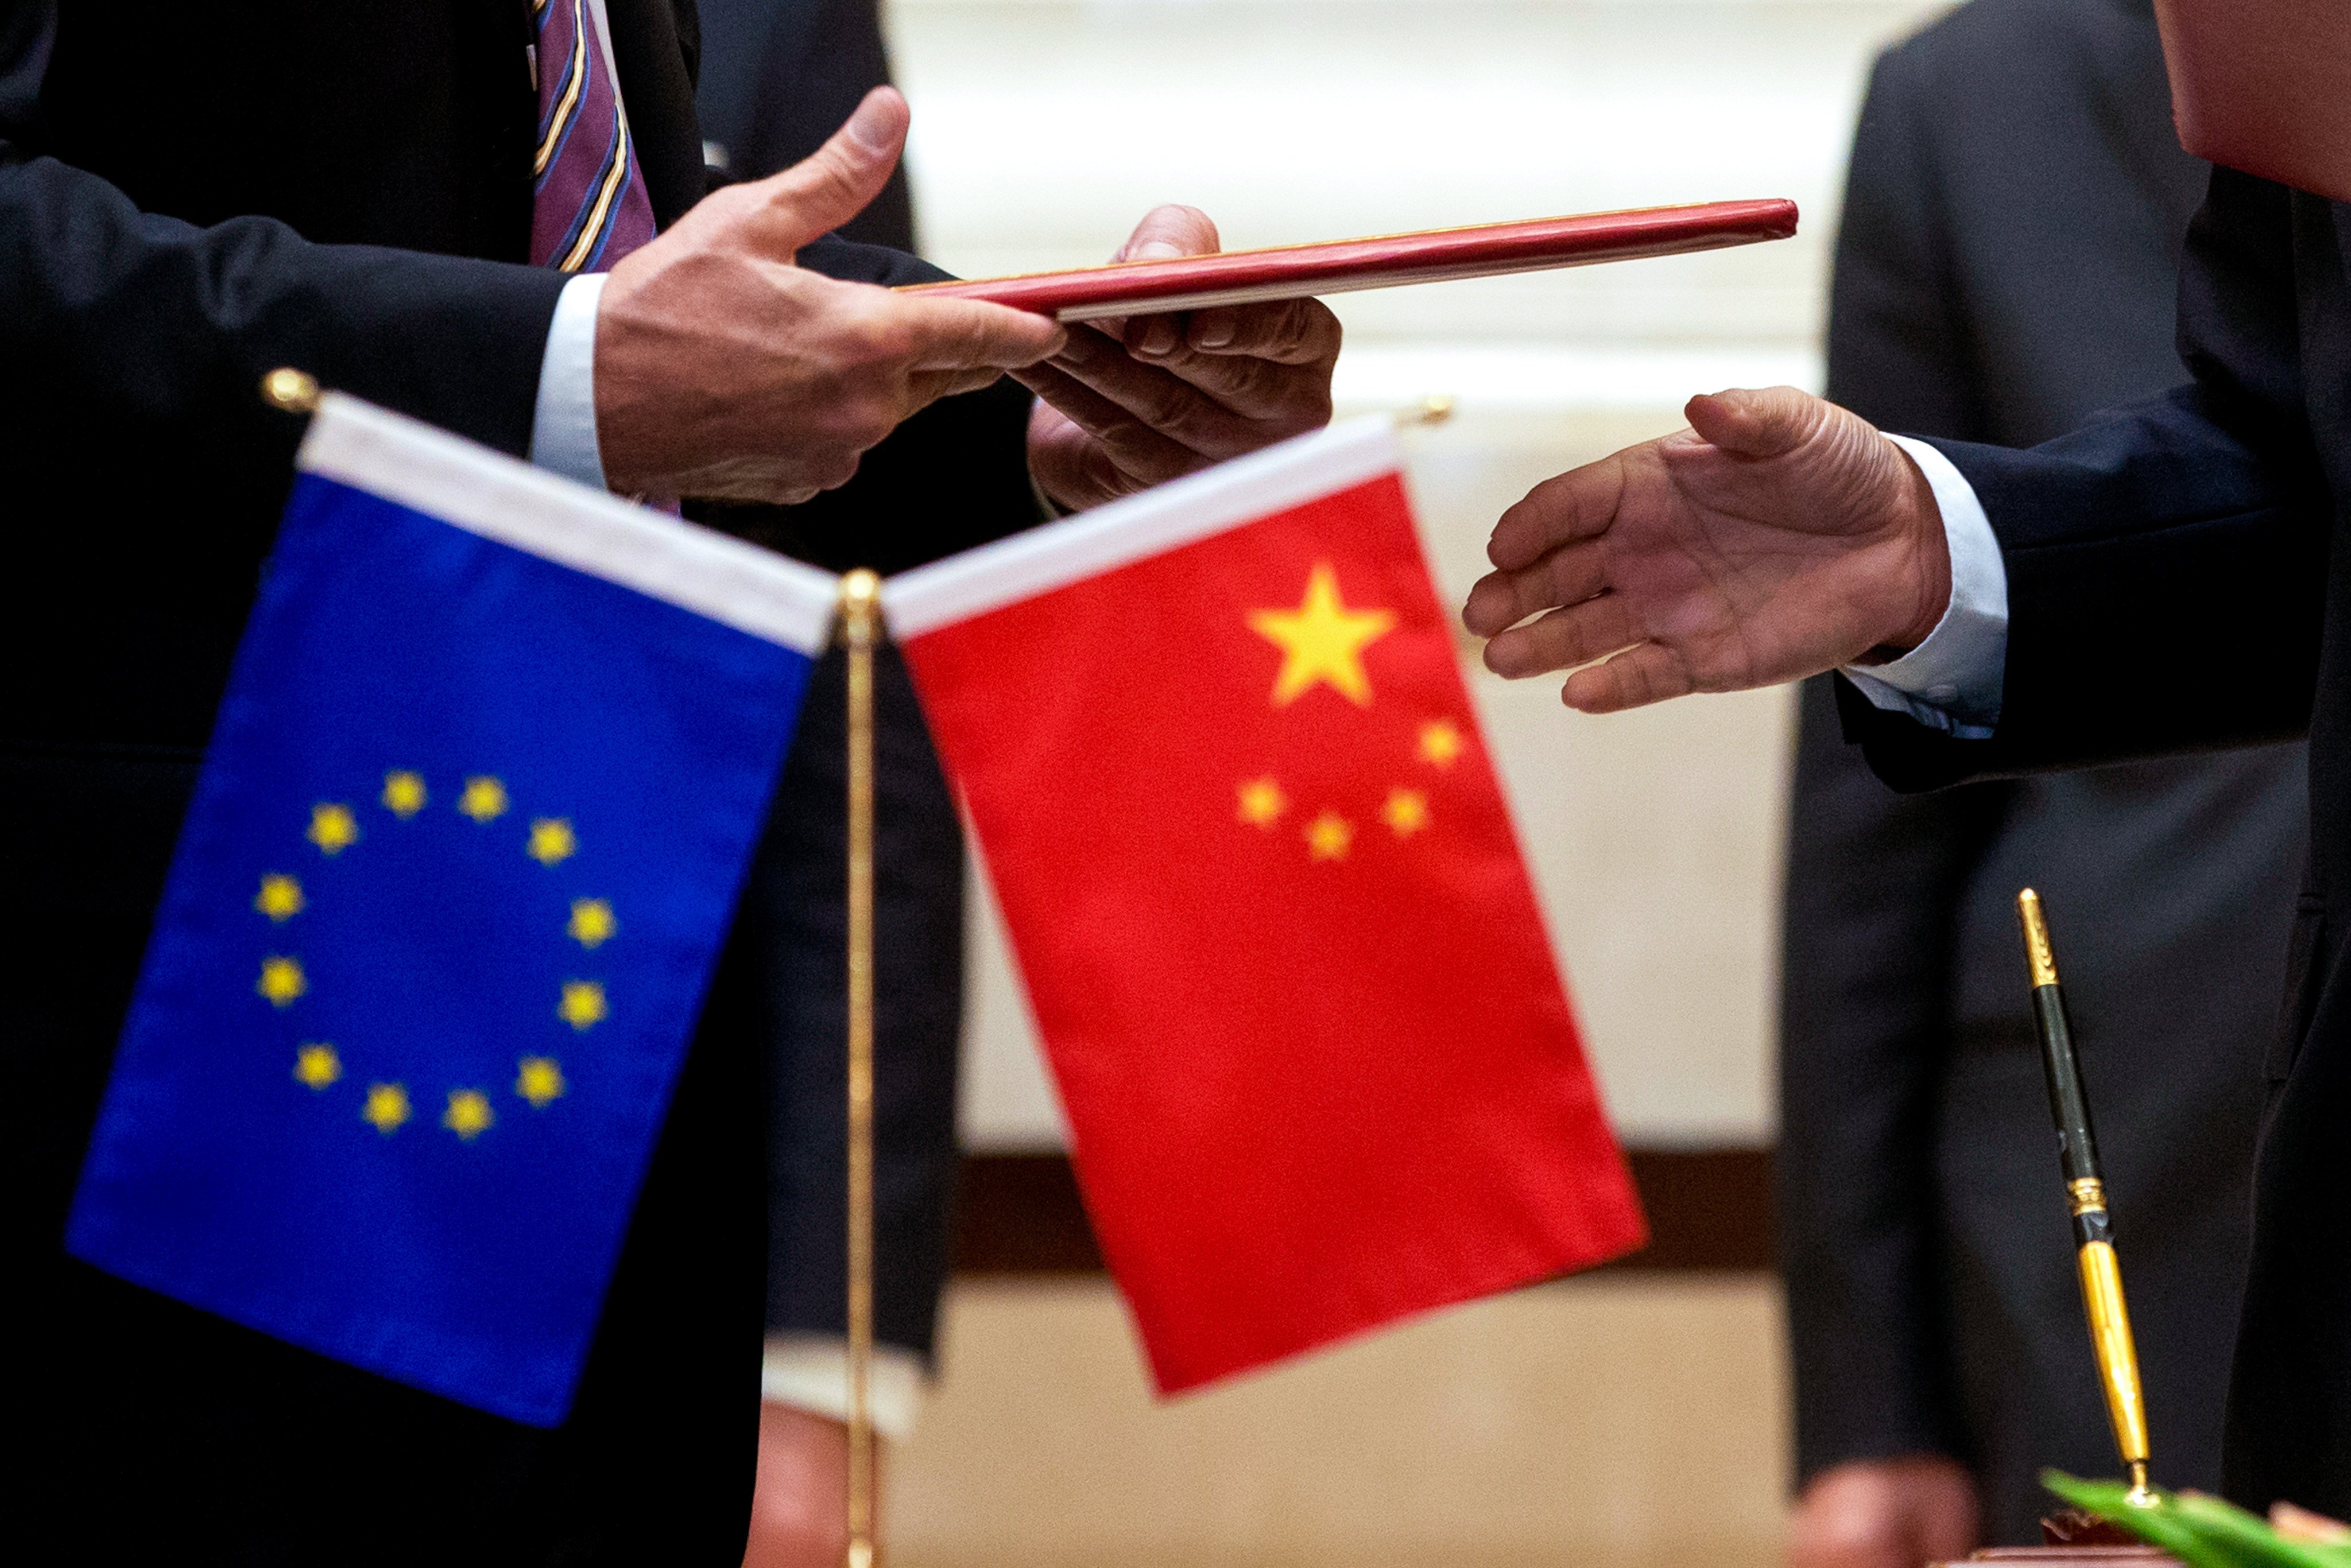 Relations between the EU and China have been strained over concerns about market access and state support for Chinese products. Photo: AP